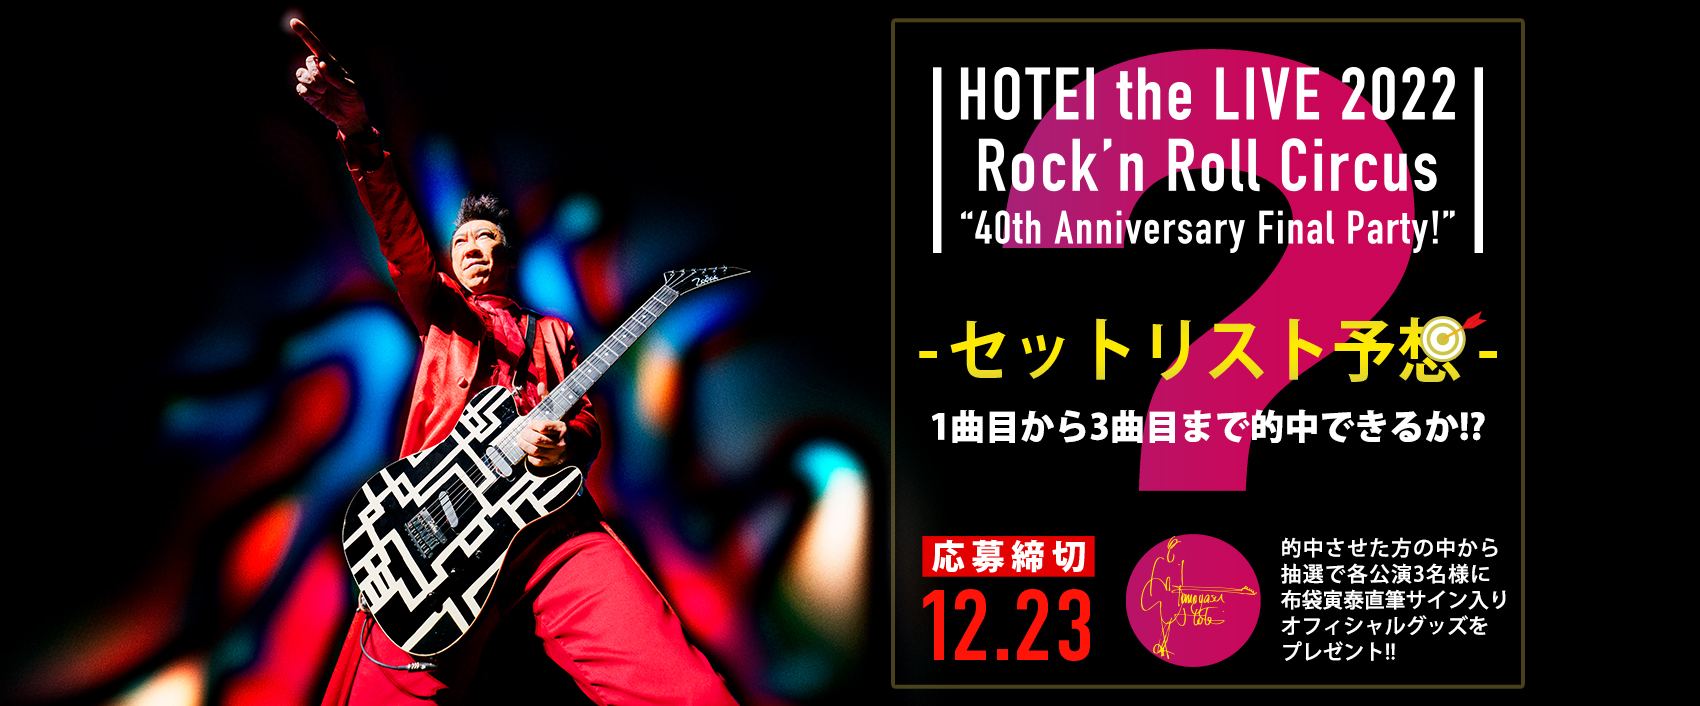 HOTEI the LIVE 2022 Rock'n Roll Circus “40th Anniversary Final Party!” -セットリスト予想-